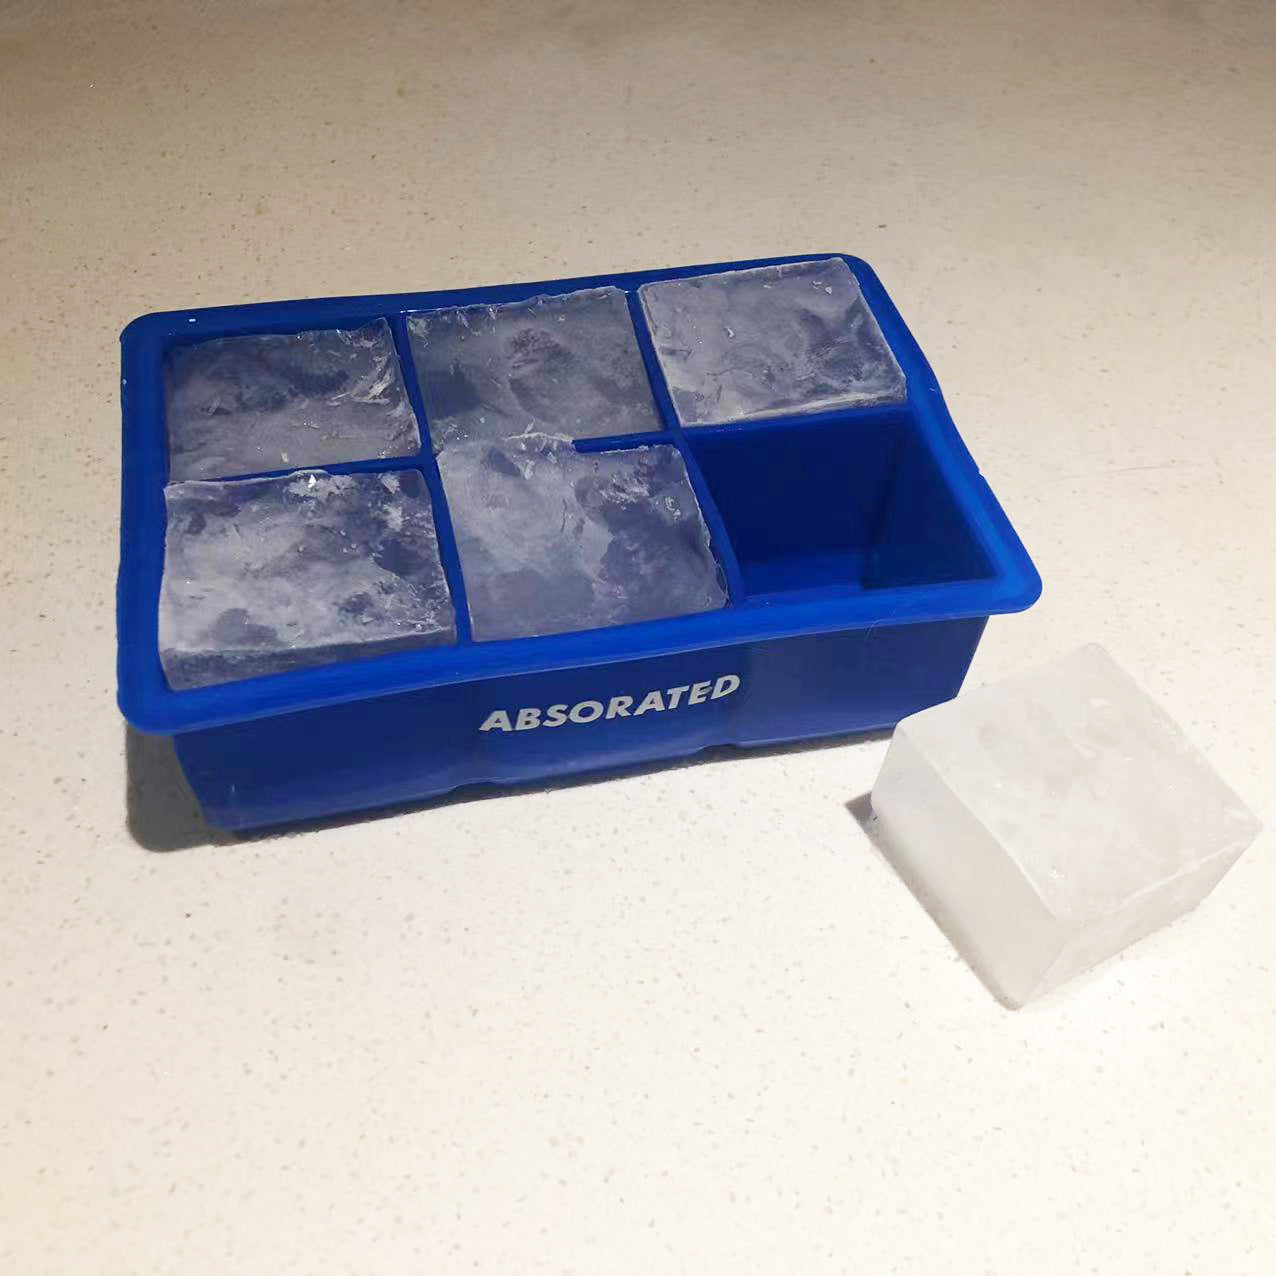 Large Cube Silicone Ice Tray, Giant 2 Inch Ice Cubes Keep Your